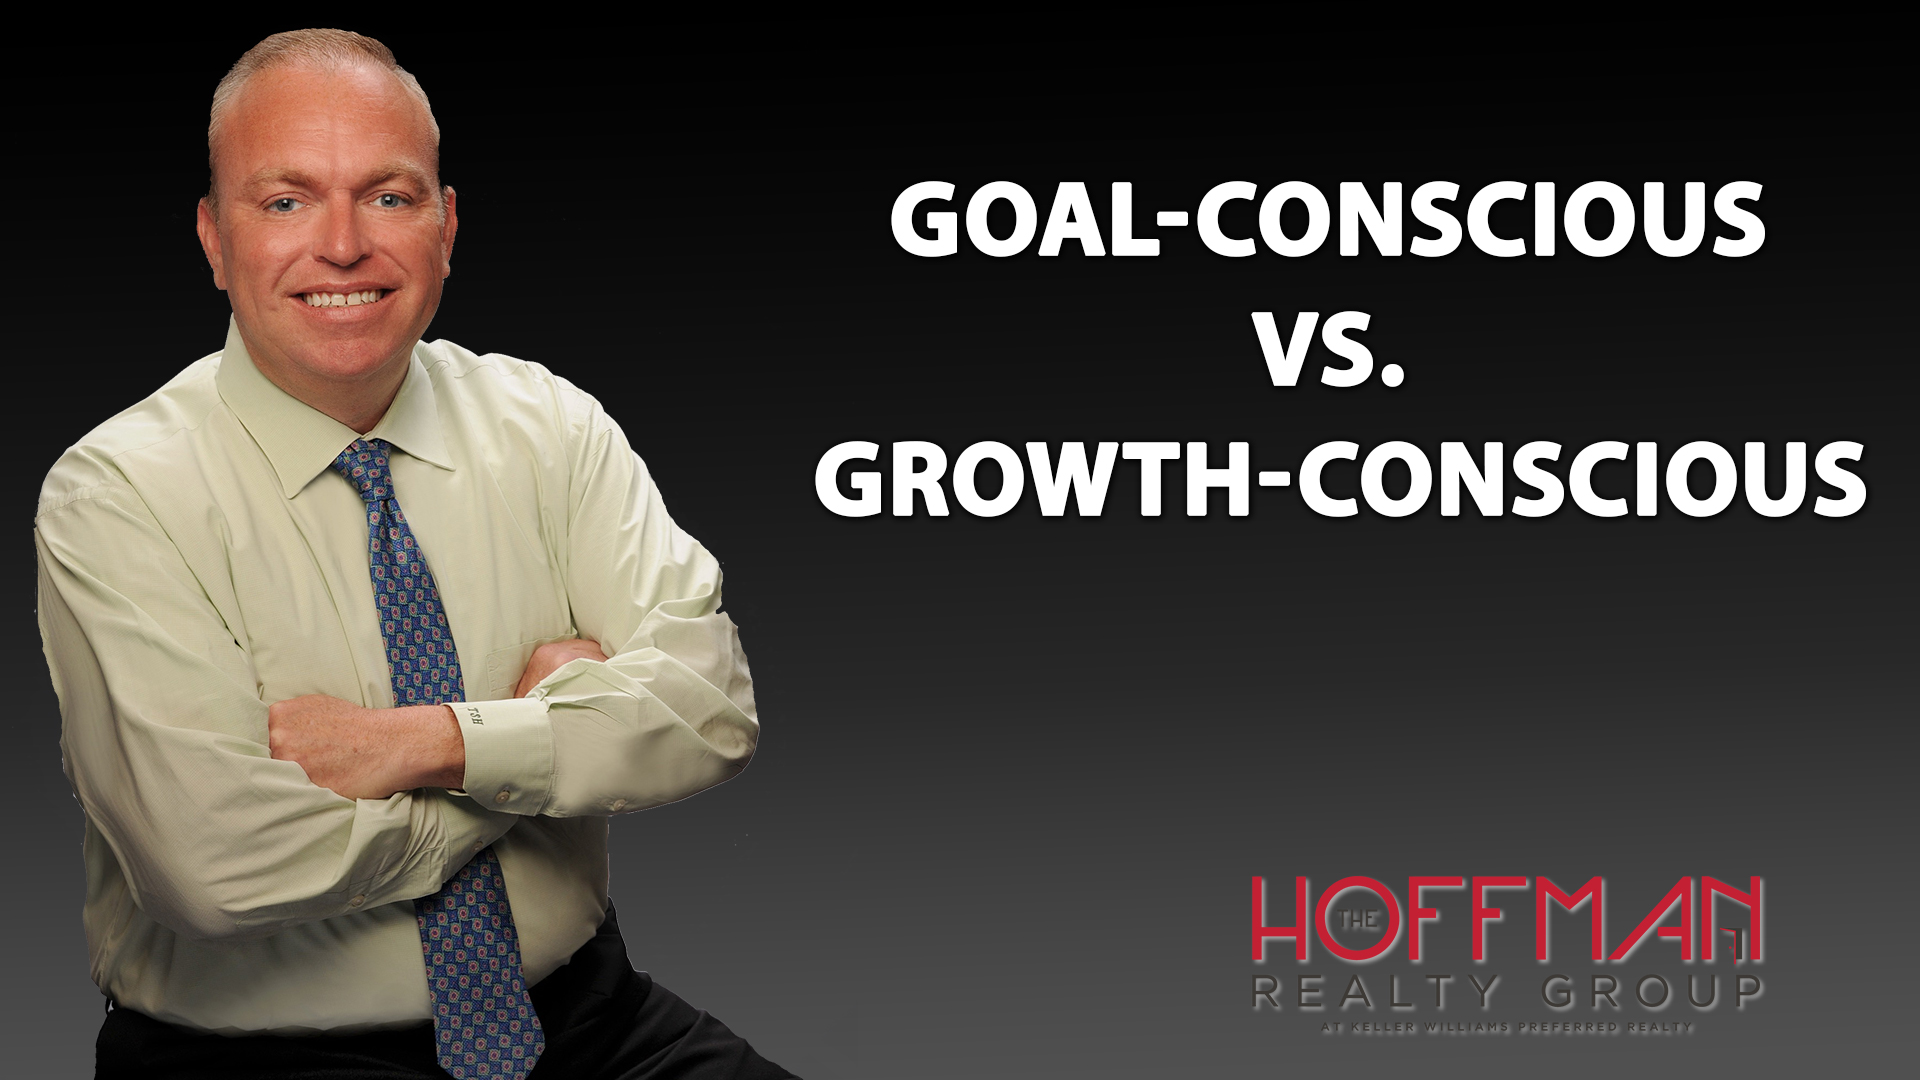 Are You a Goal- or Growth-Conscious Person?